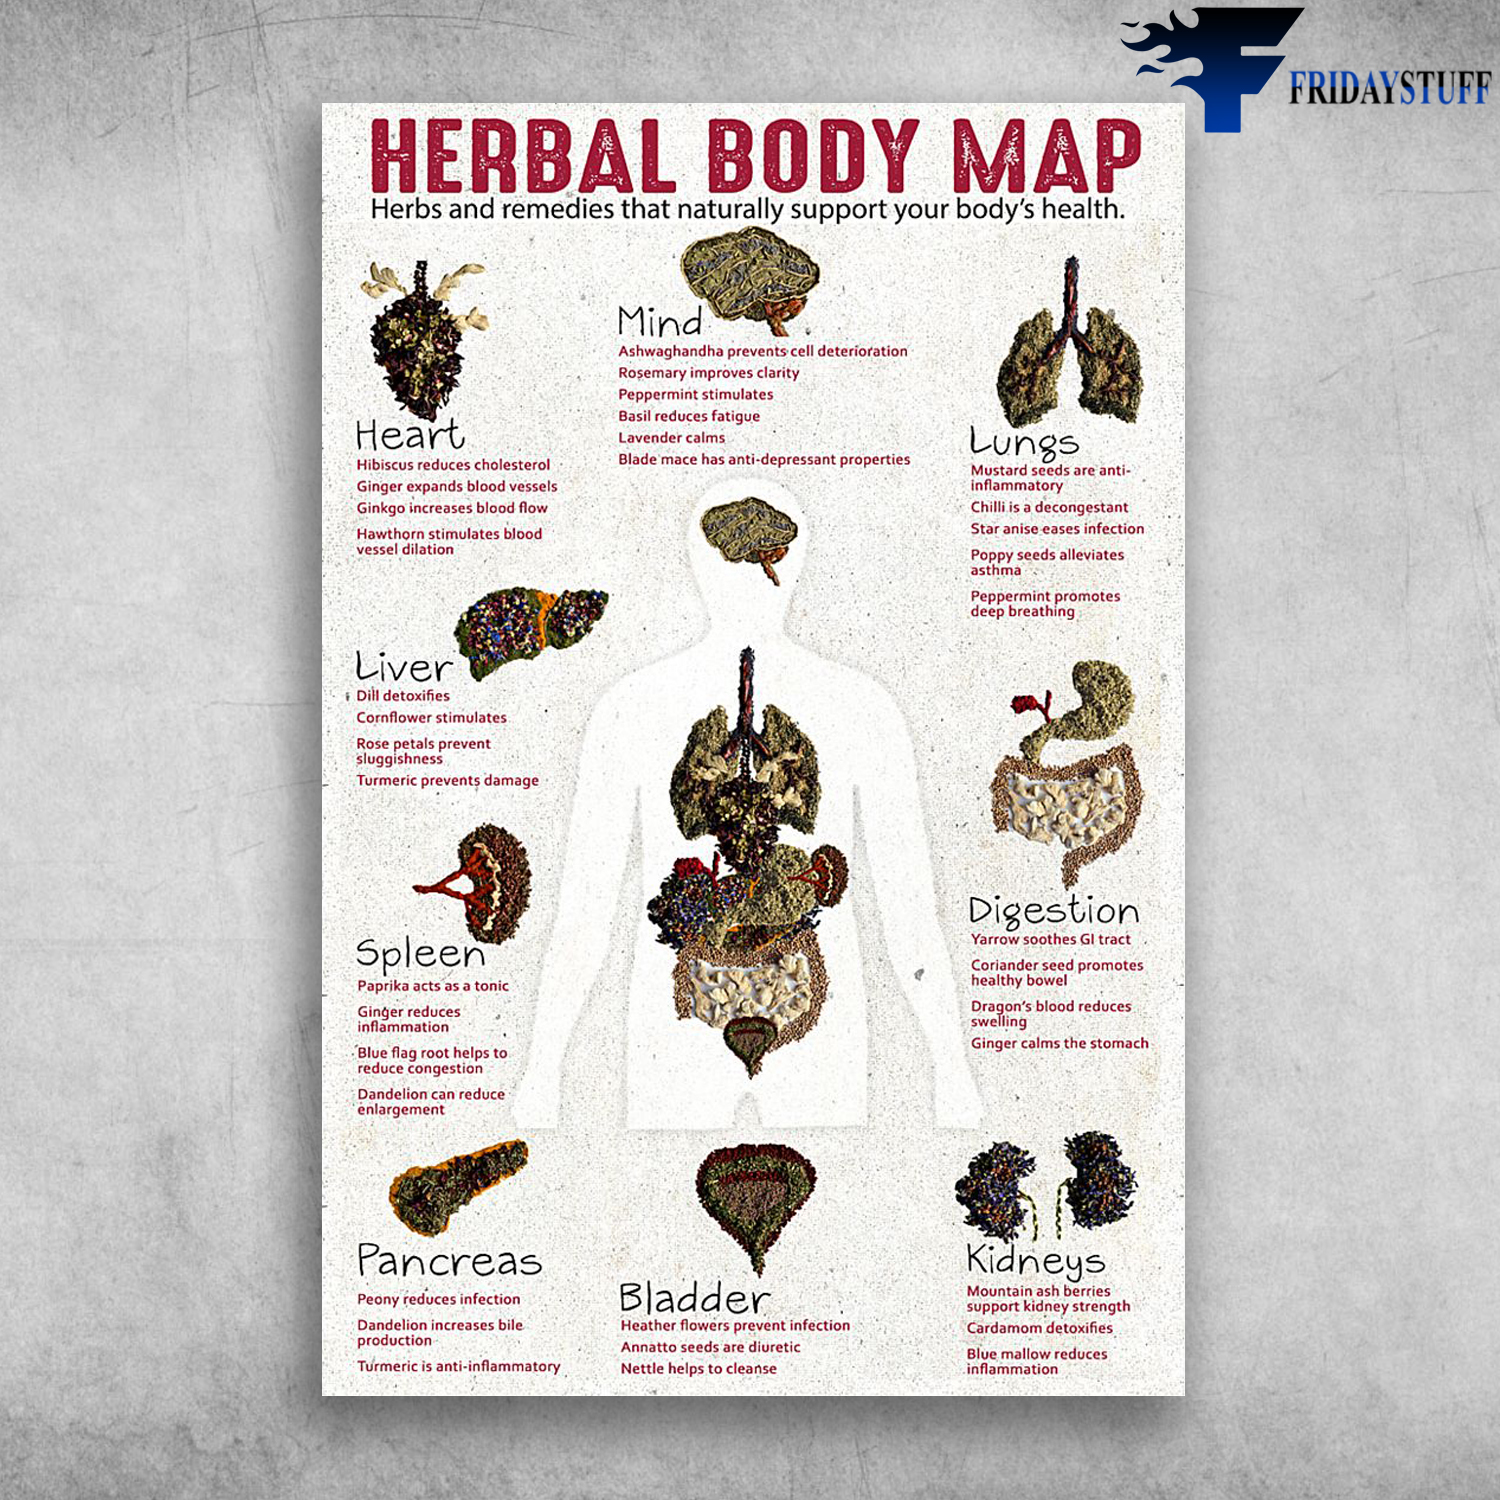 Herbal Body Map Herbs And Remedies That Support Your Body's Health